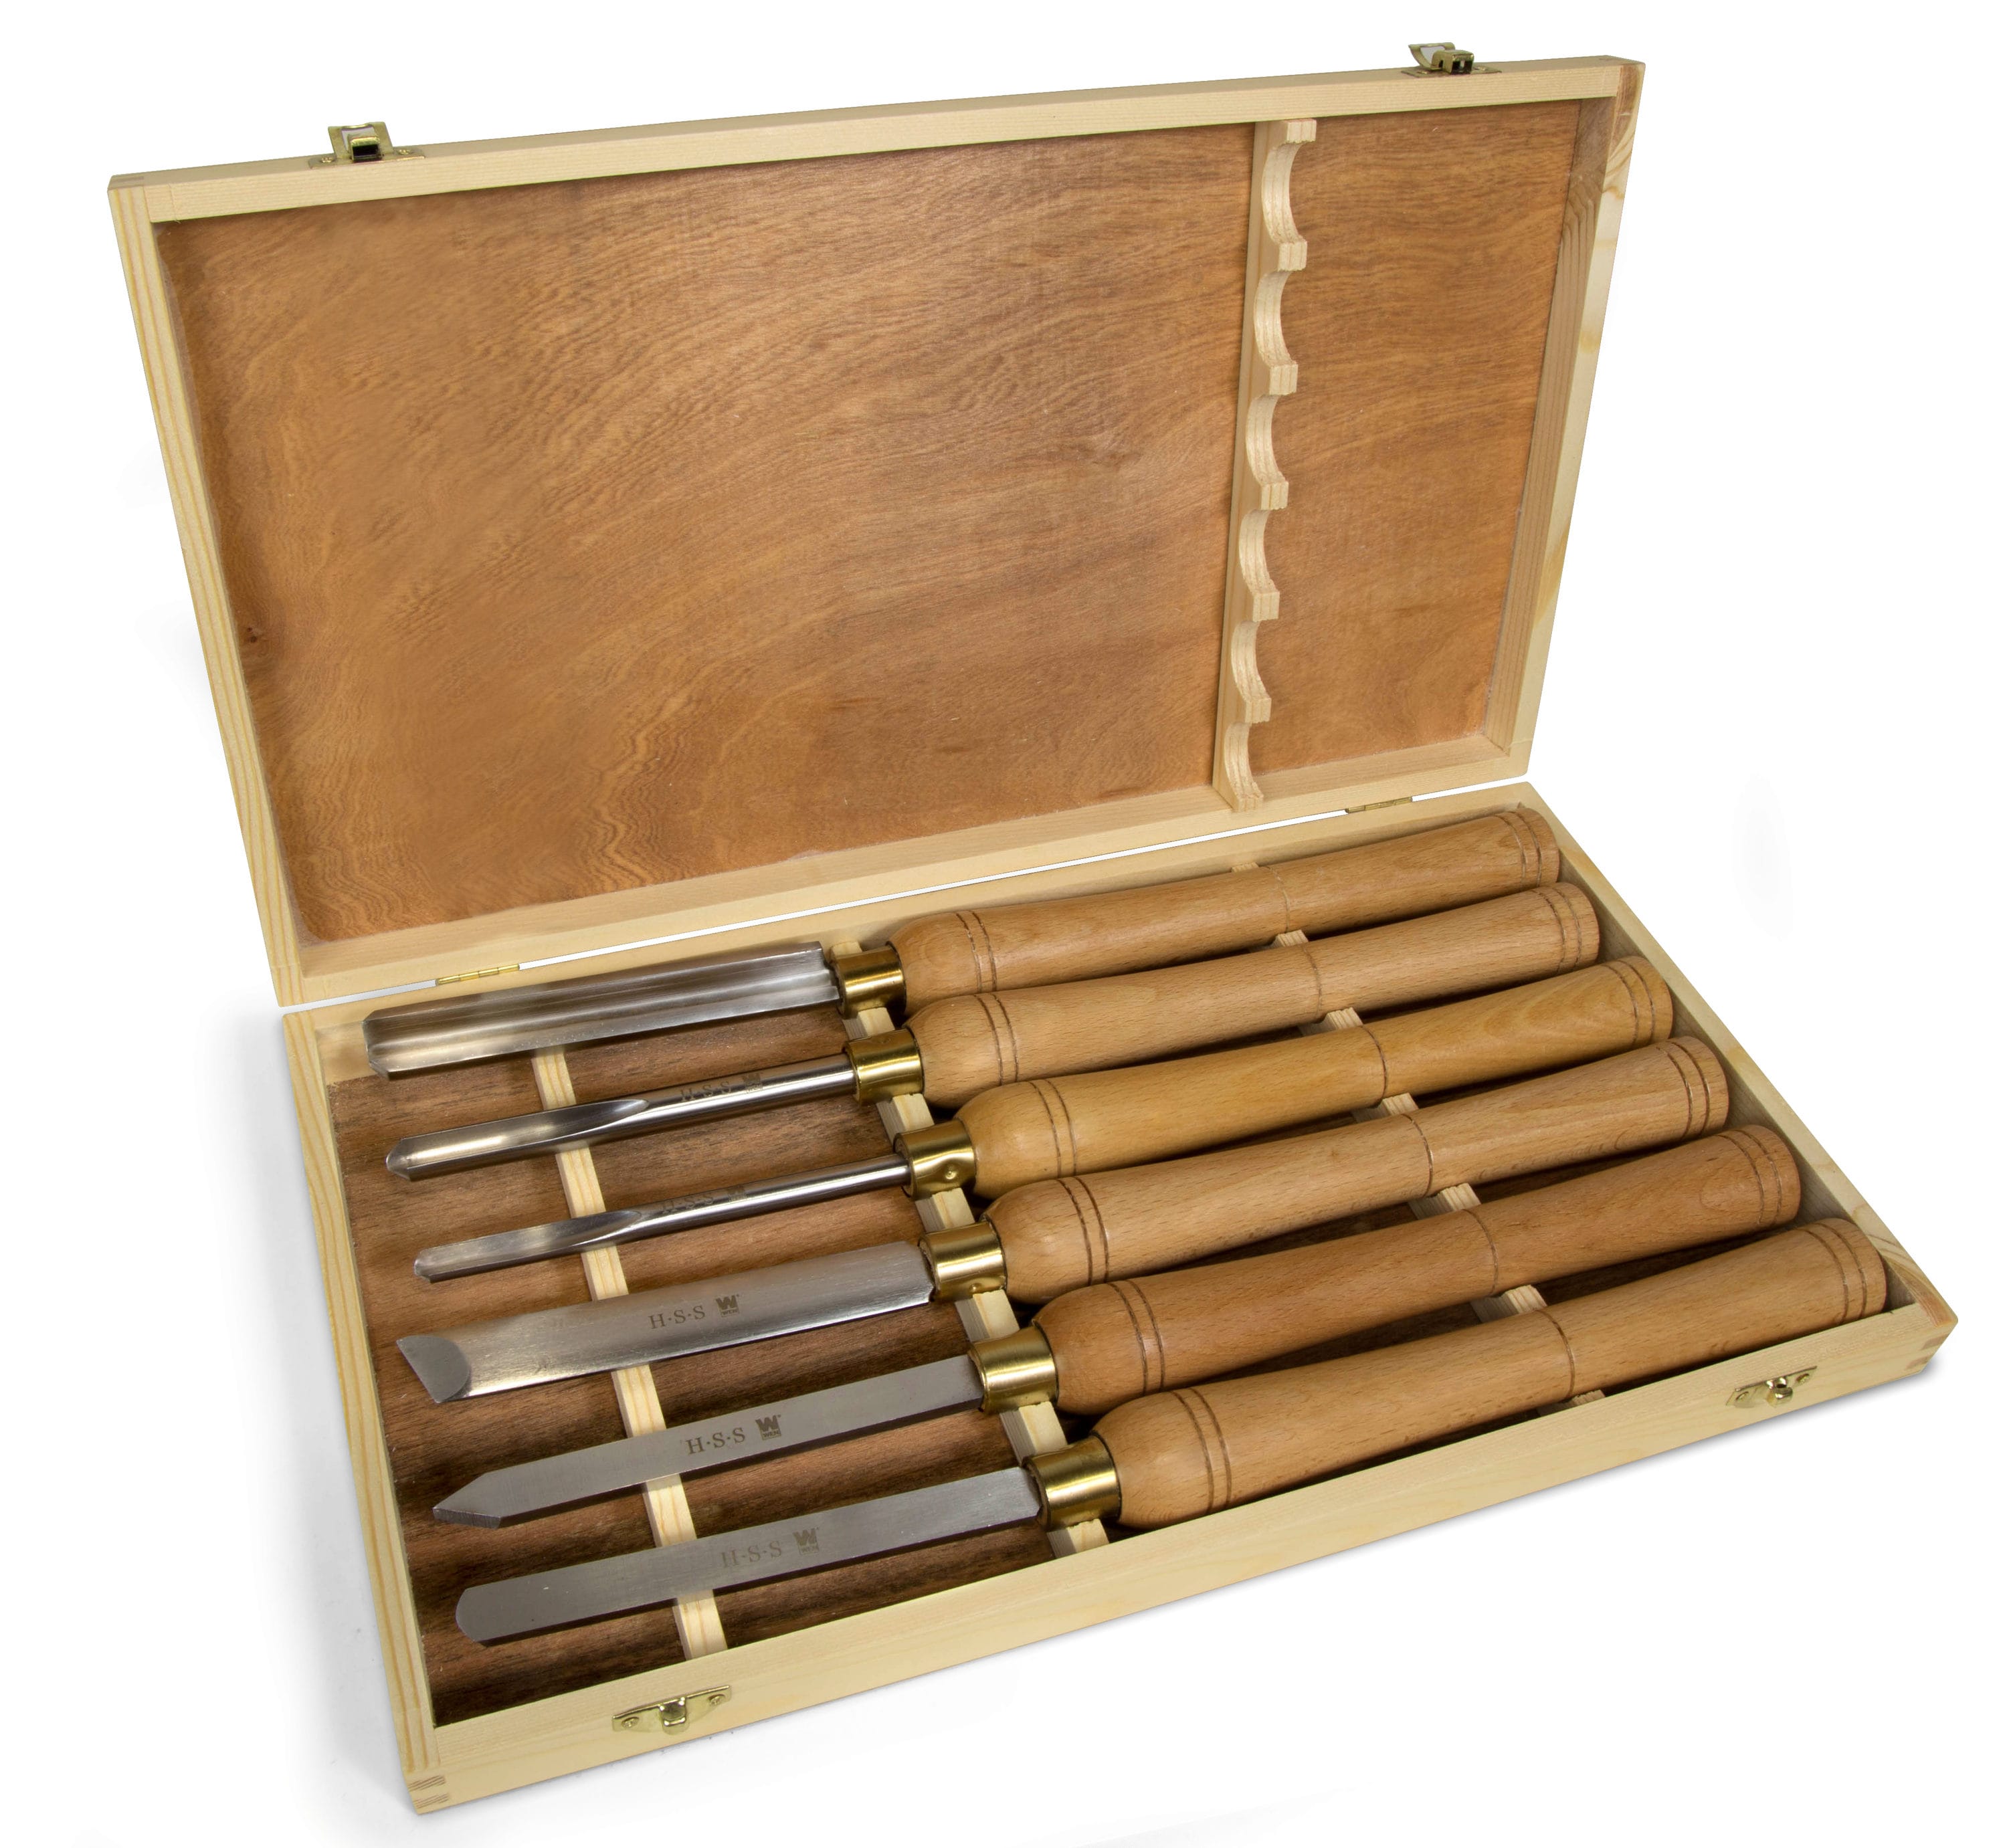 SET OF 6 STAINLESS PRECISION WOOD CARVING CHISELS TOOLS 